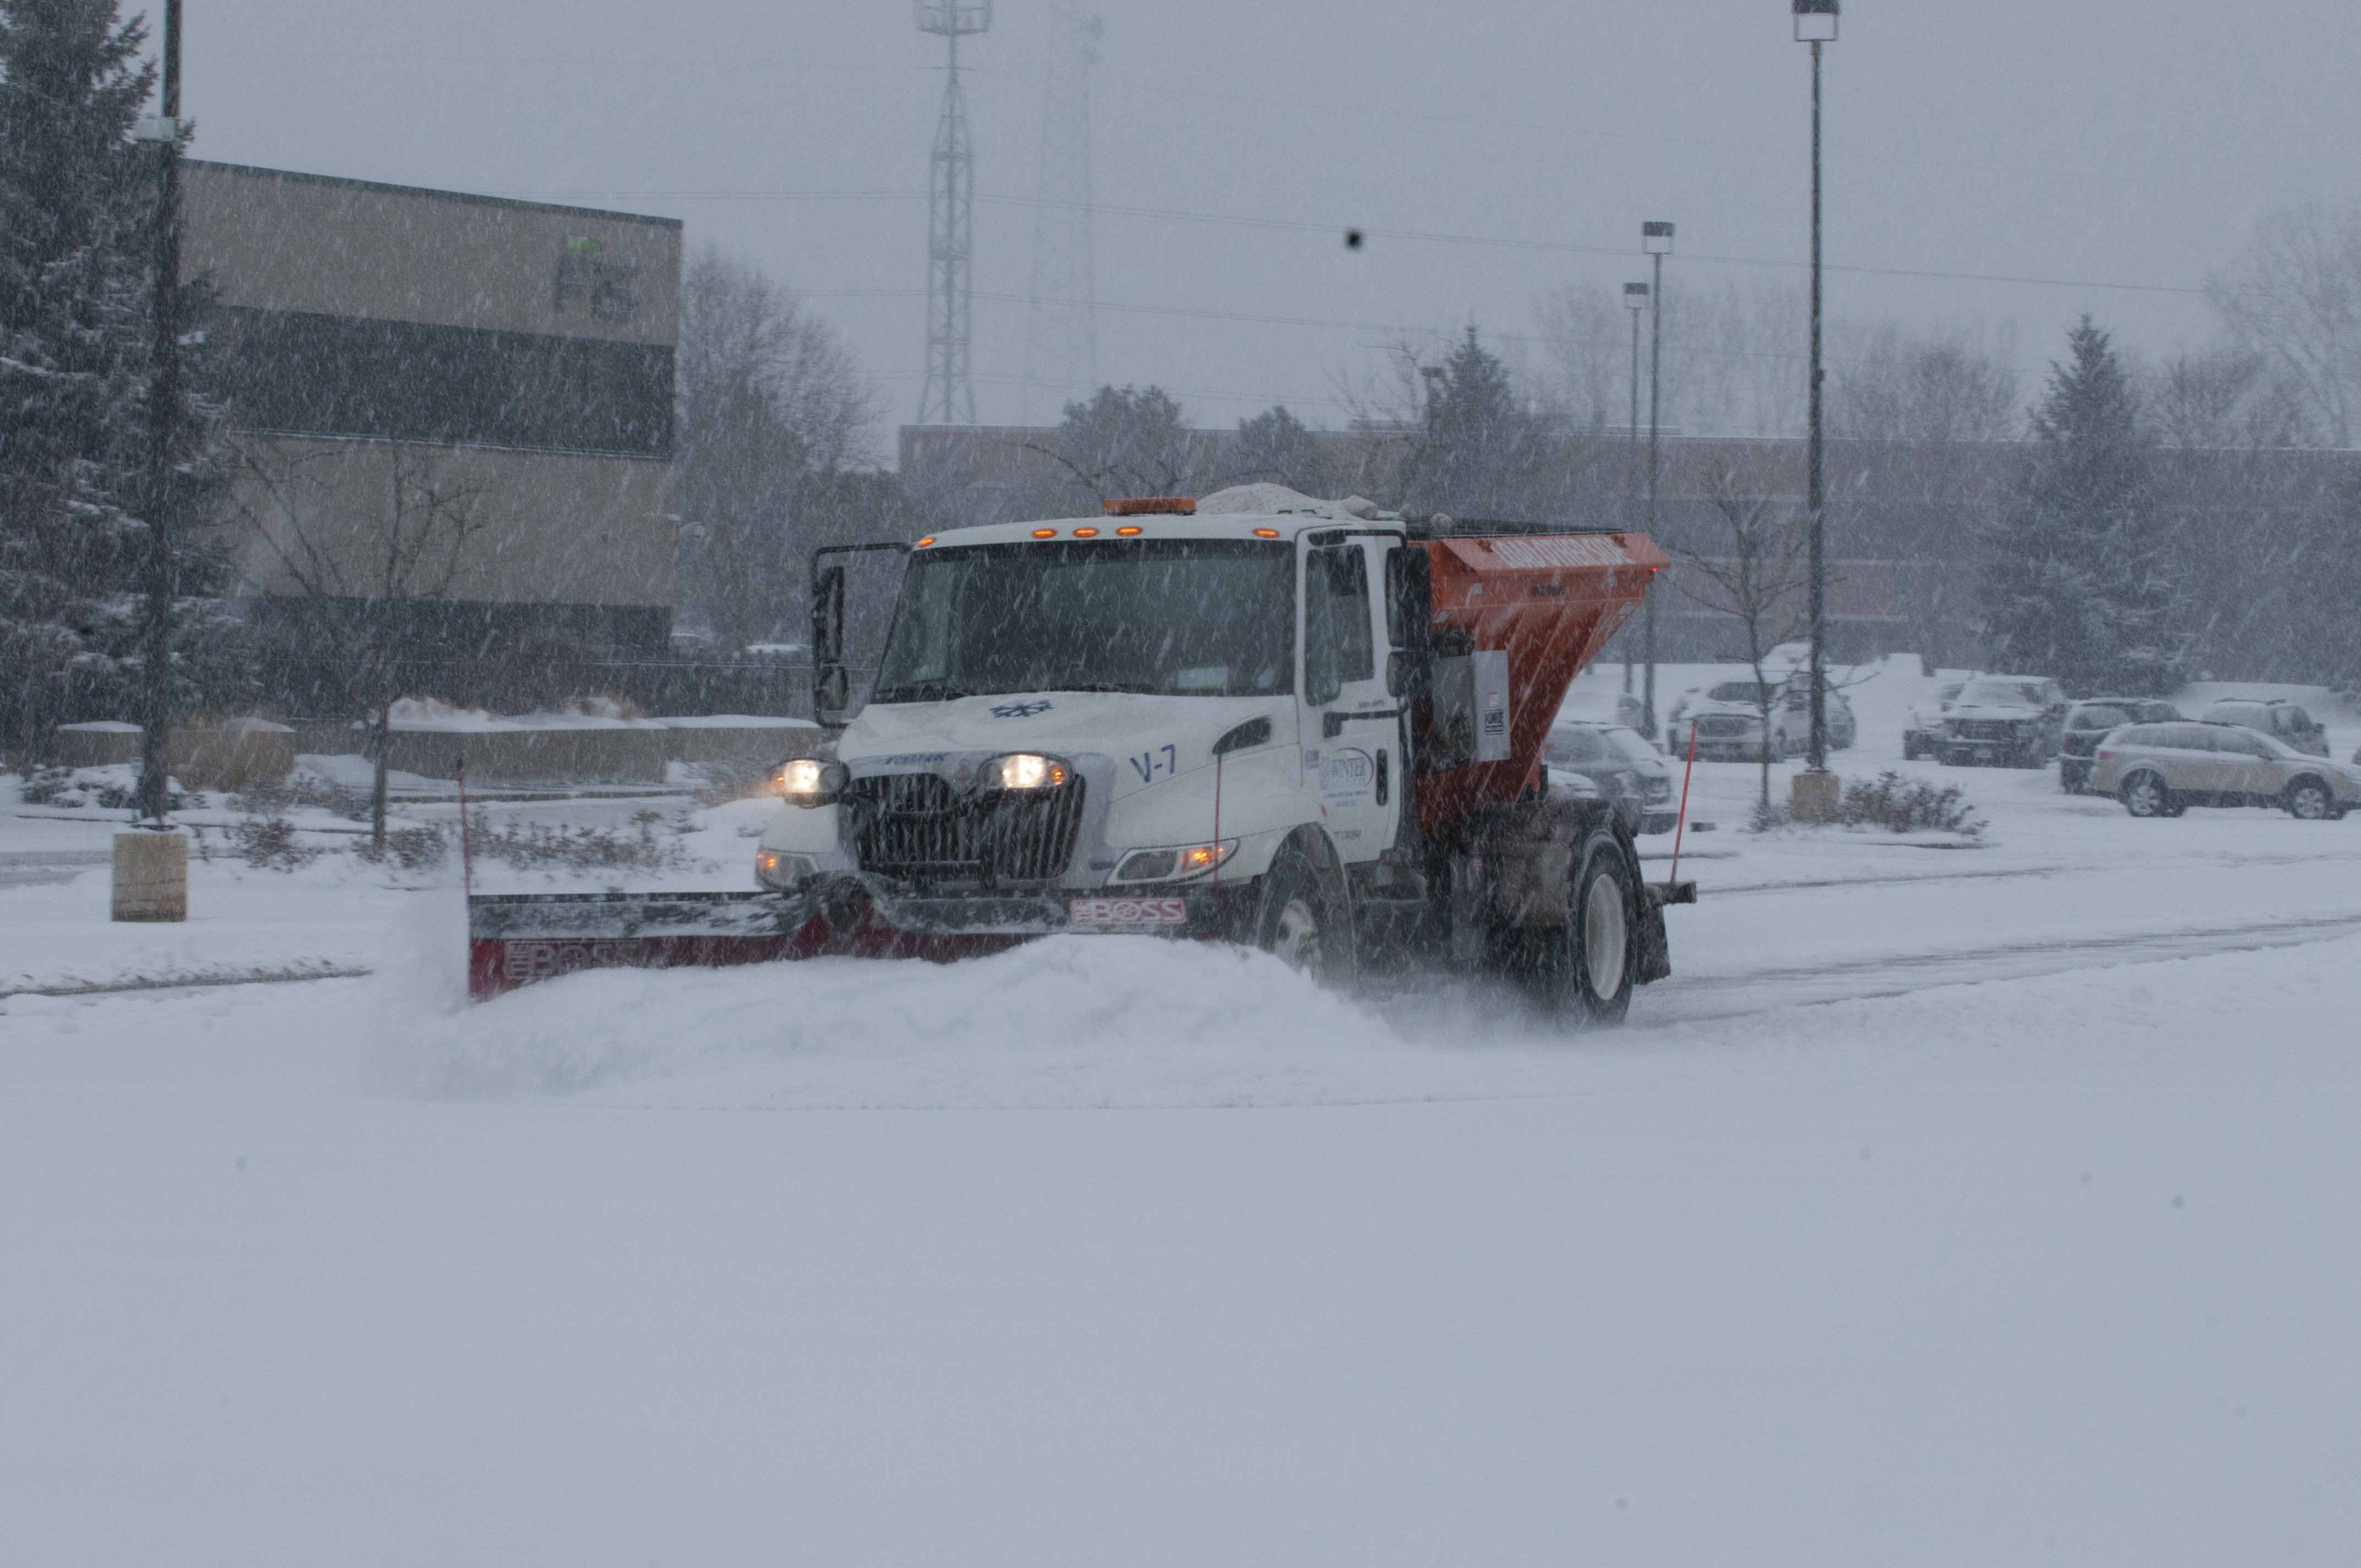 Snowplow Clearing Snow During Snowstorm